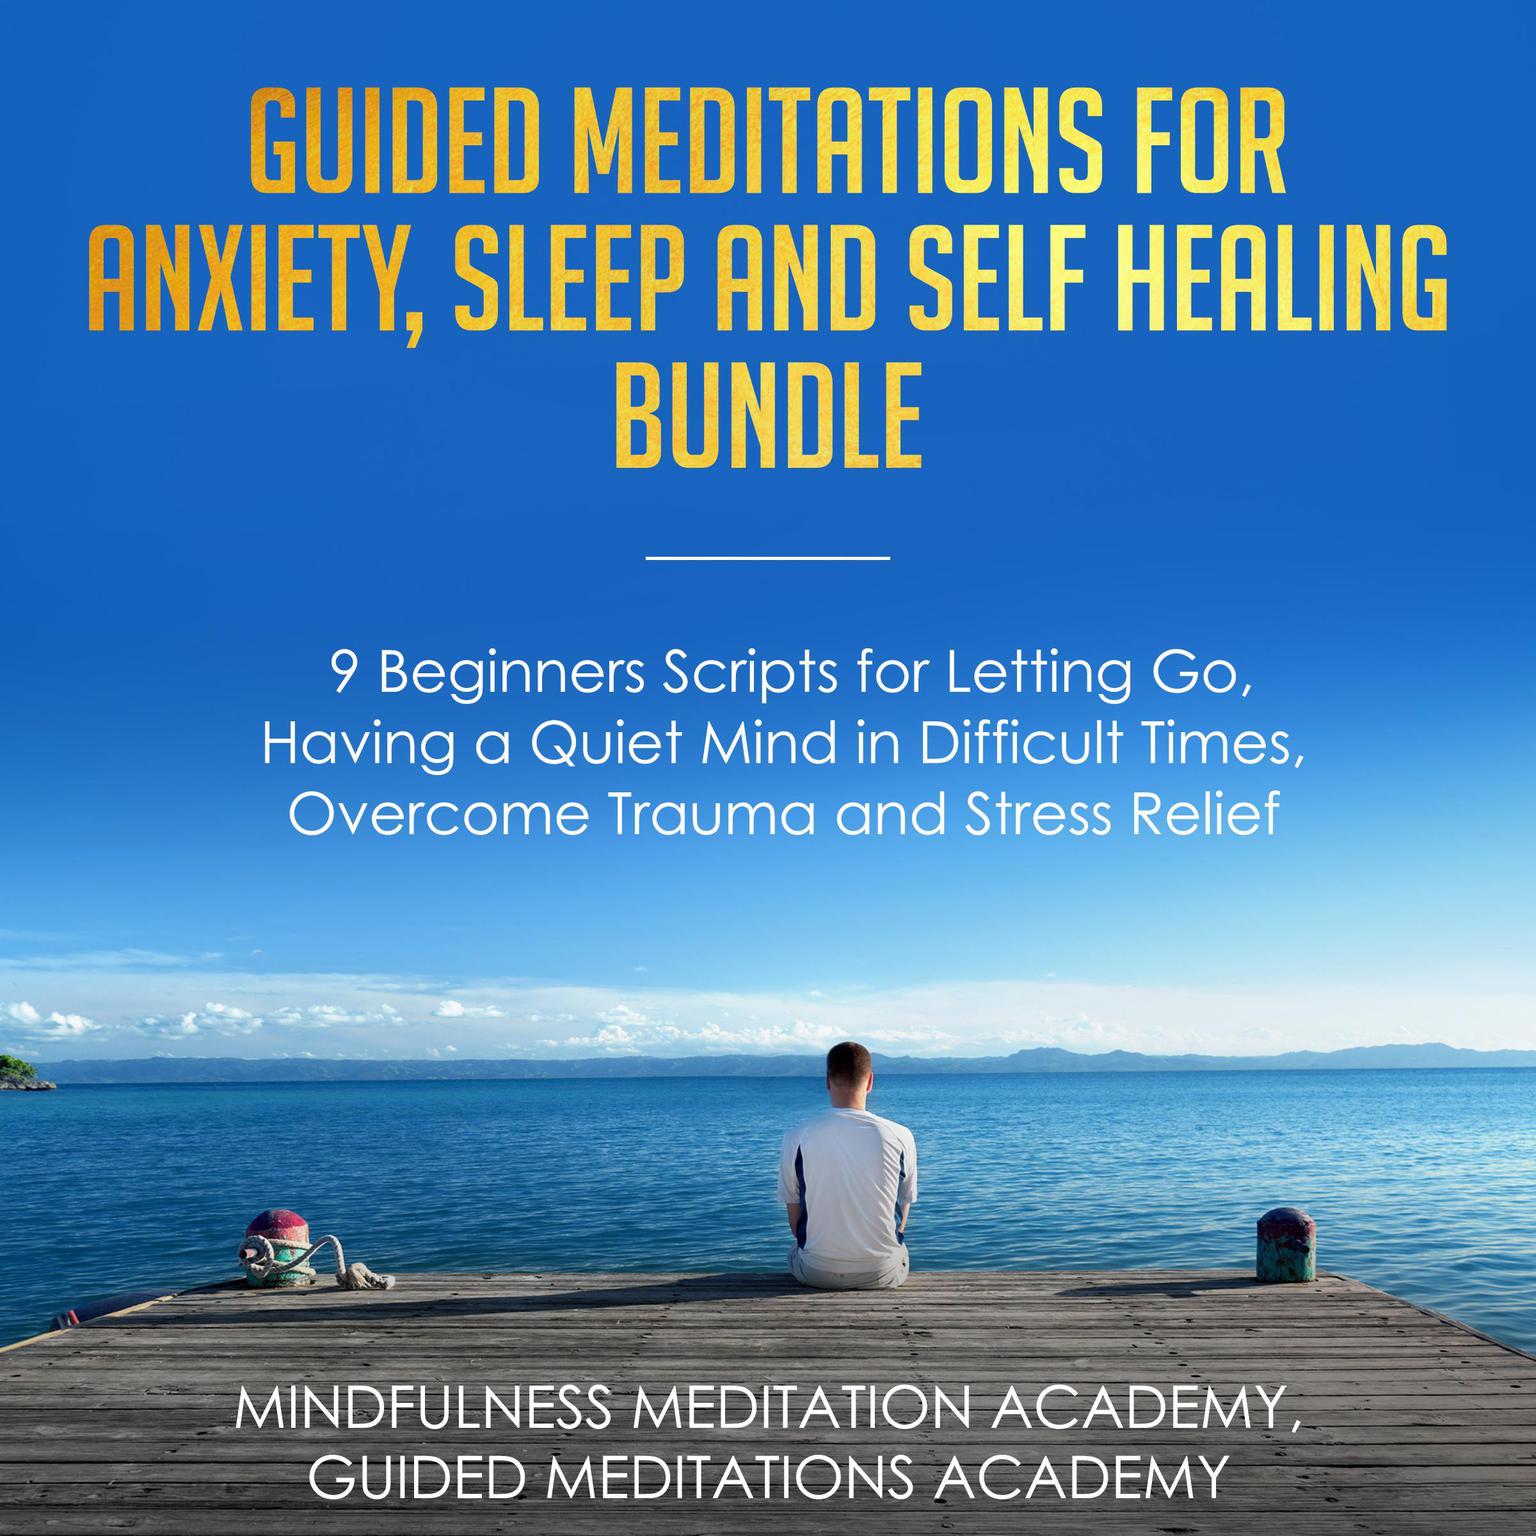 Guided Meditations for Anxiety, Sleep and Self Healing Bundle: 9 Beginners Scripts for Letting Go, Having a Quiet Mind in Difficult Times, Overcome Trauma and Stress Relief Audiobook, by Guided Meditations Academy